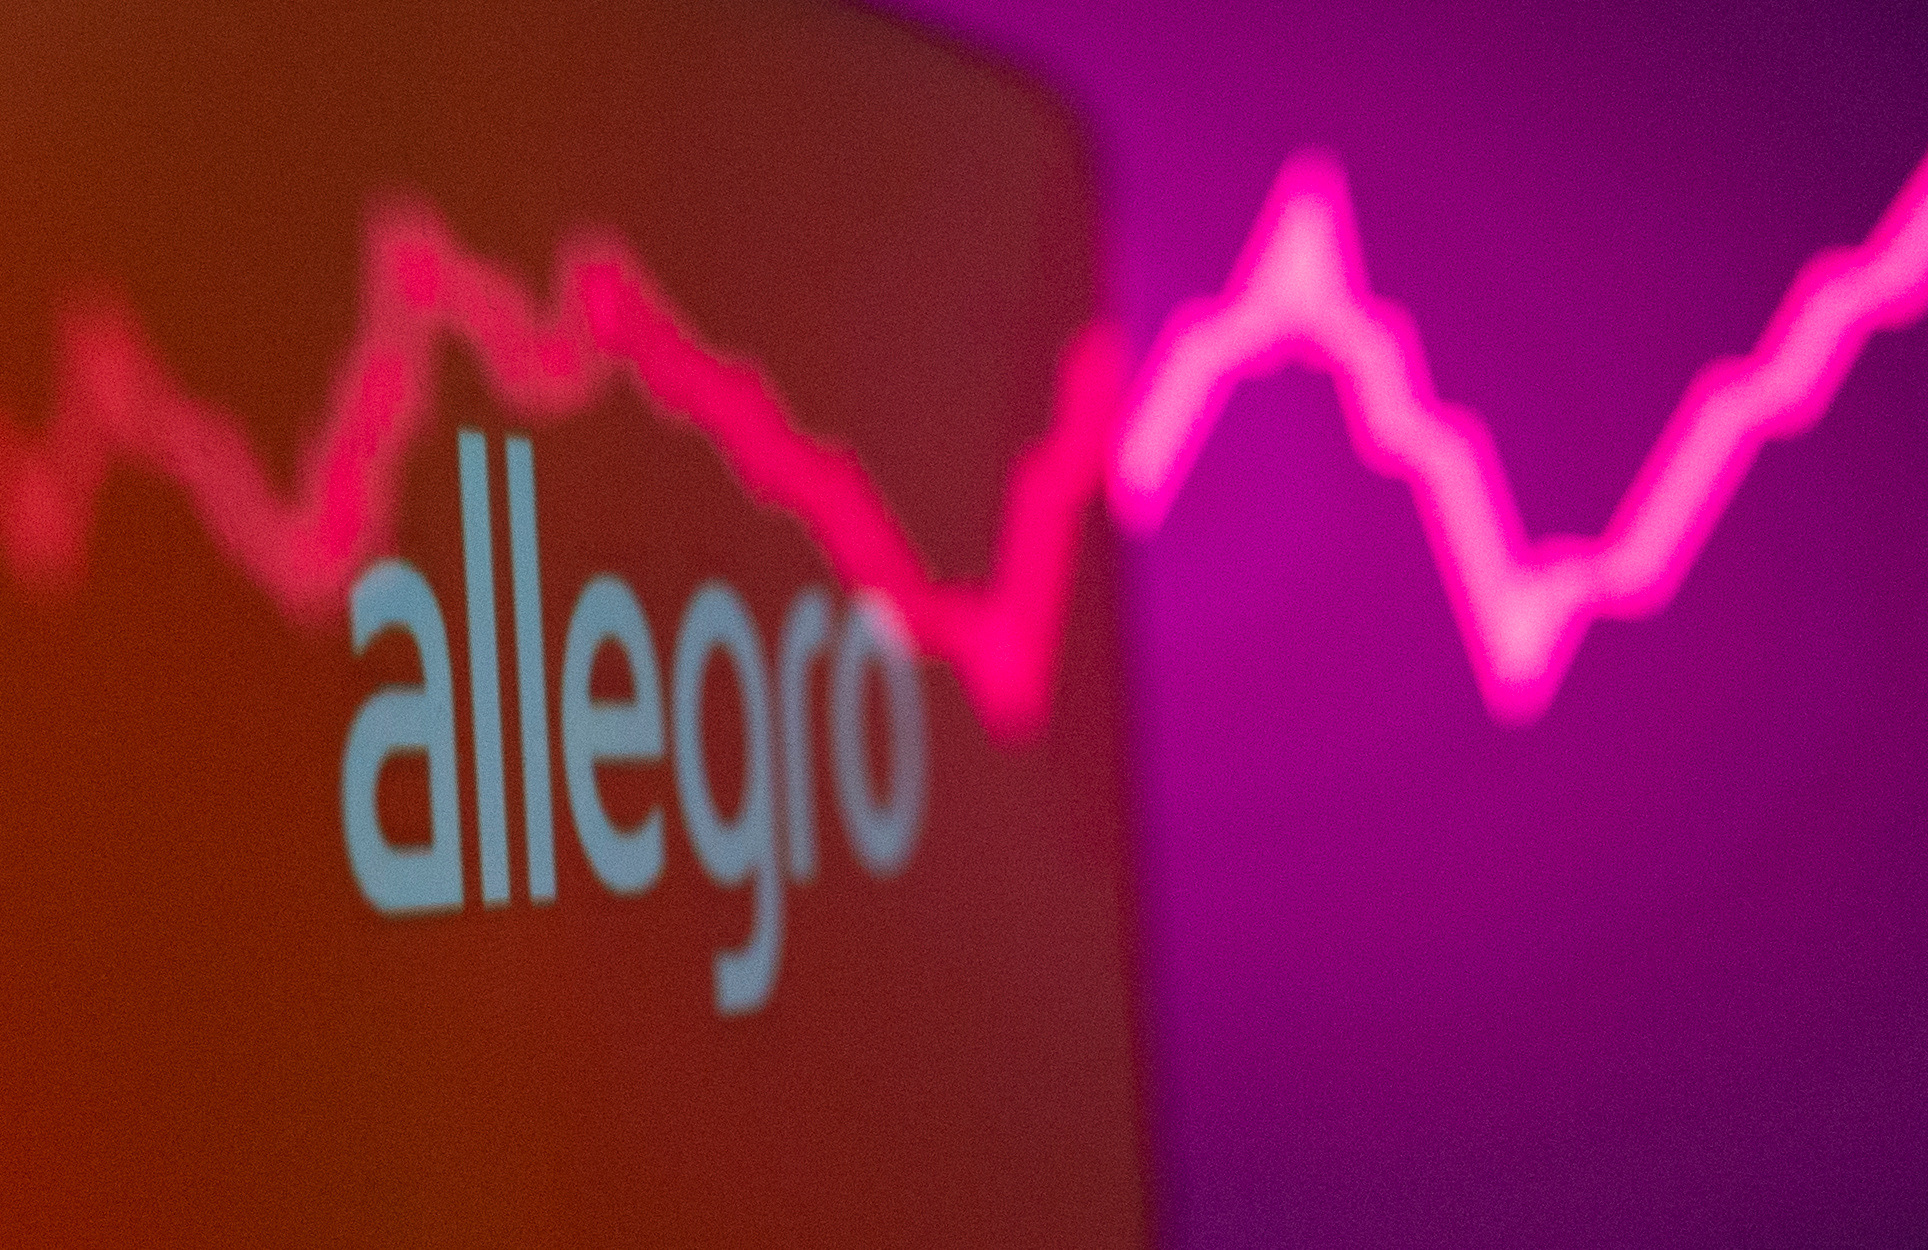 Allegro logo is seen on a smartphone in front of a displayed stock graph in this illustration